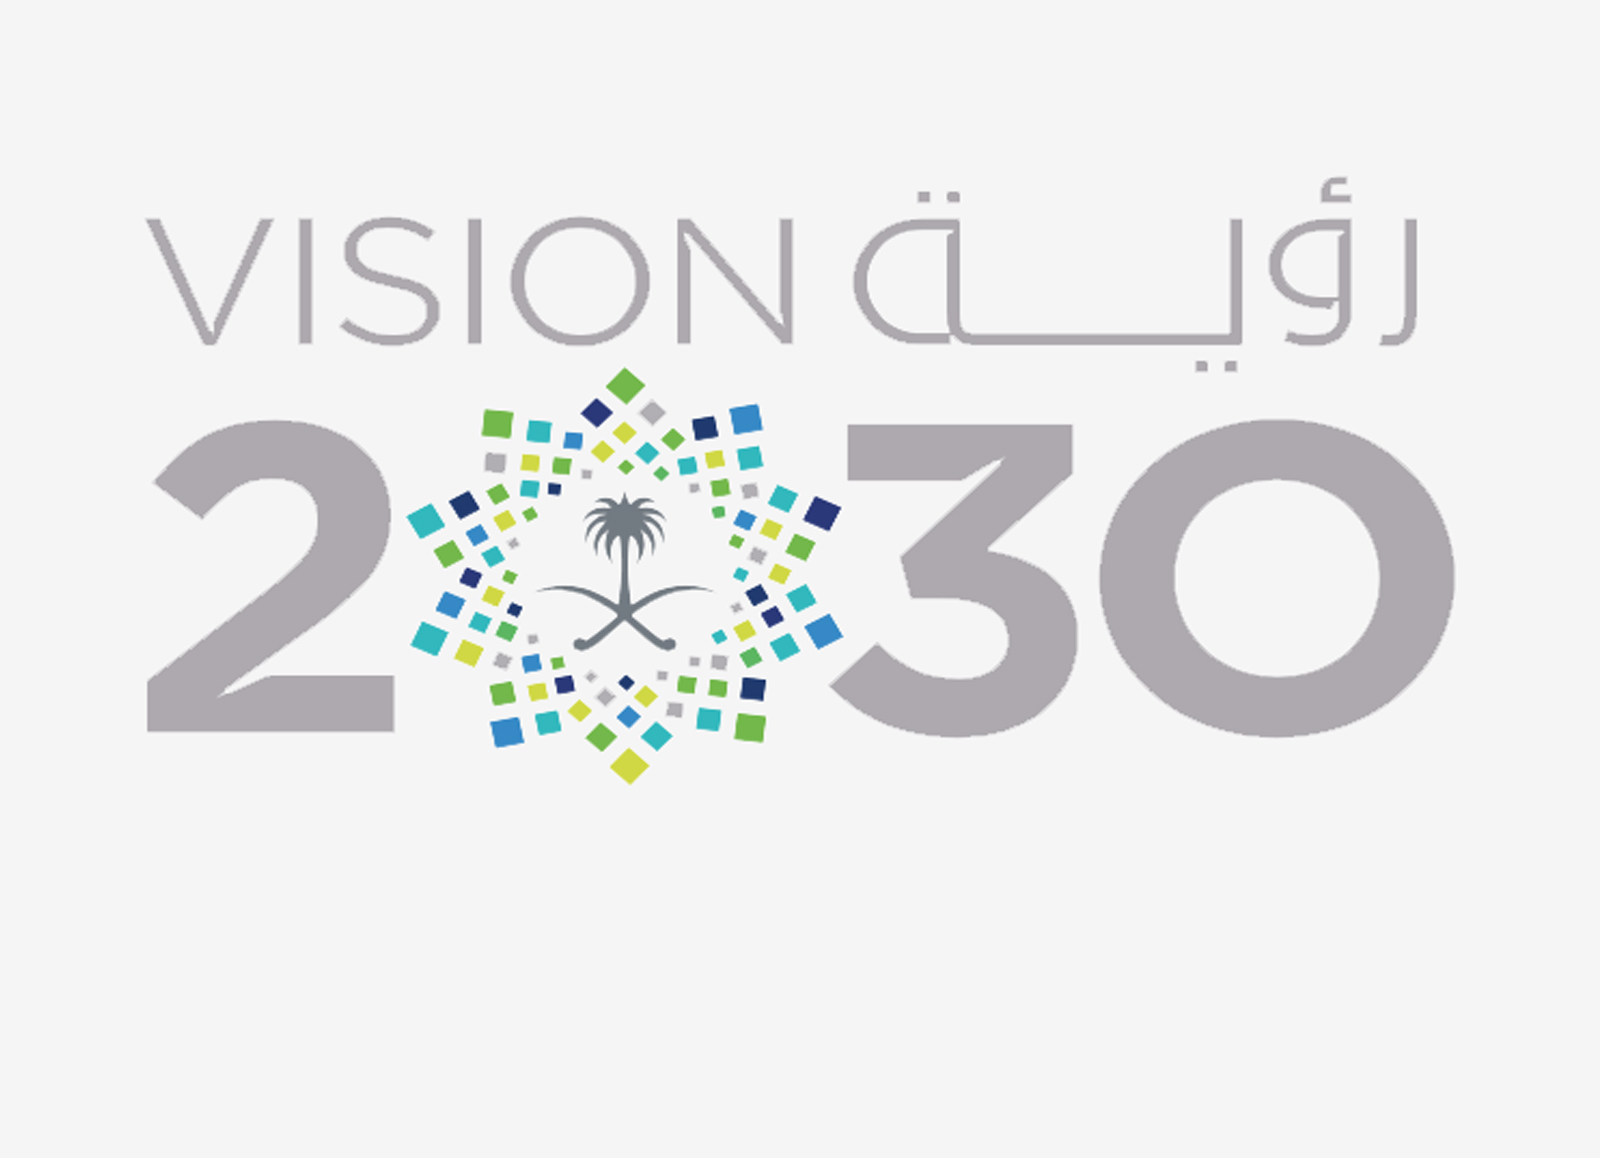 Taking strides forward with Vision 2030